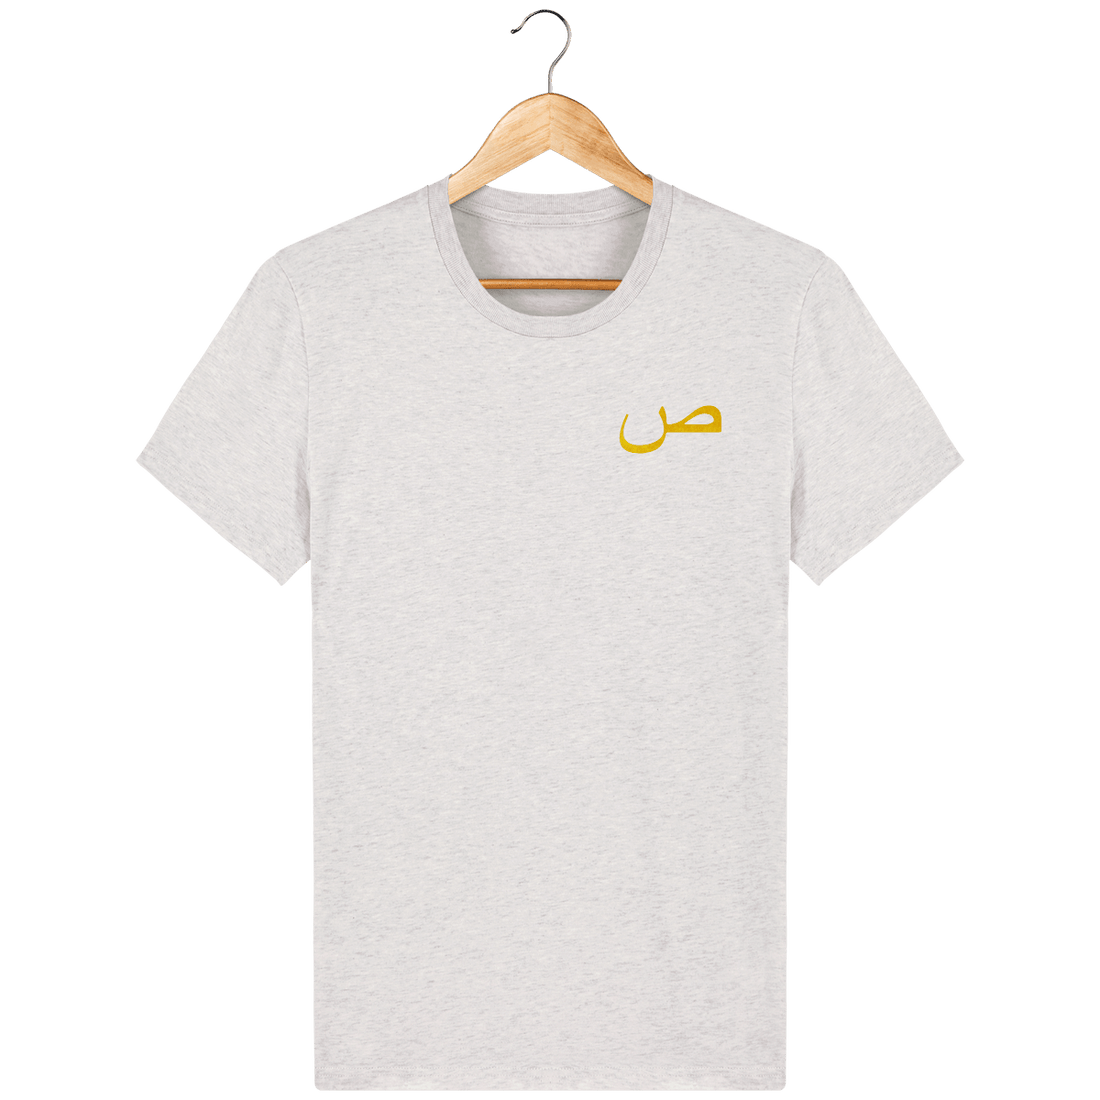 Unisexe>Tee-shirts - T-Shirt Homme <br> Lettre Arabe Saad